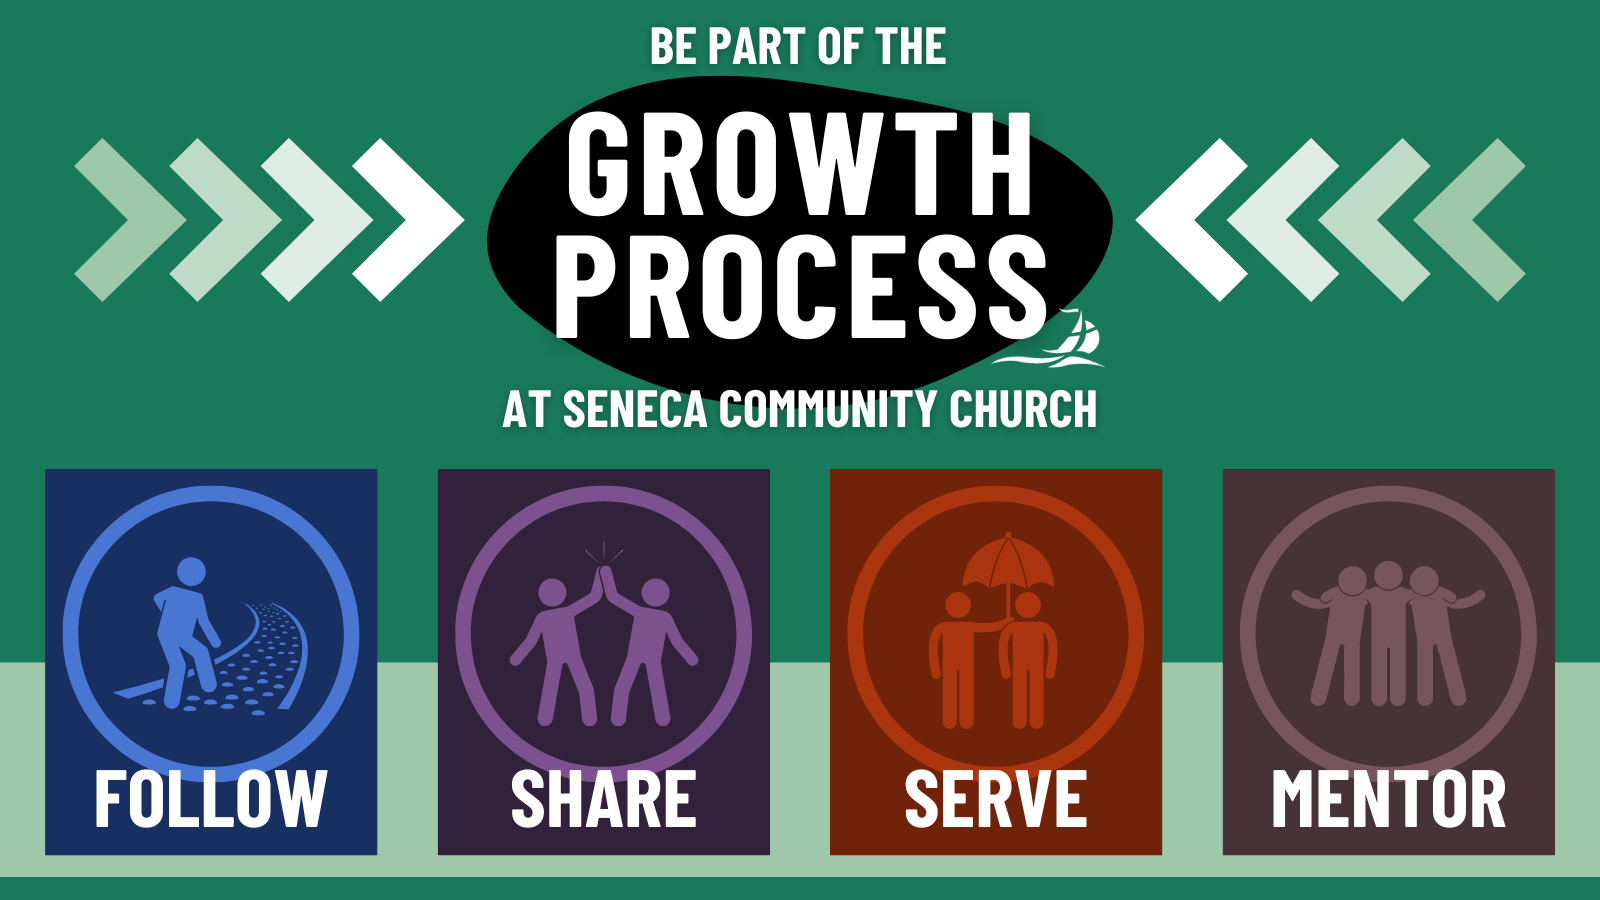 The Growth Process at SCC